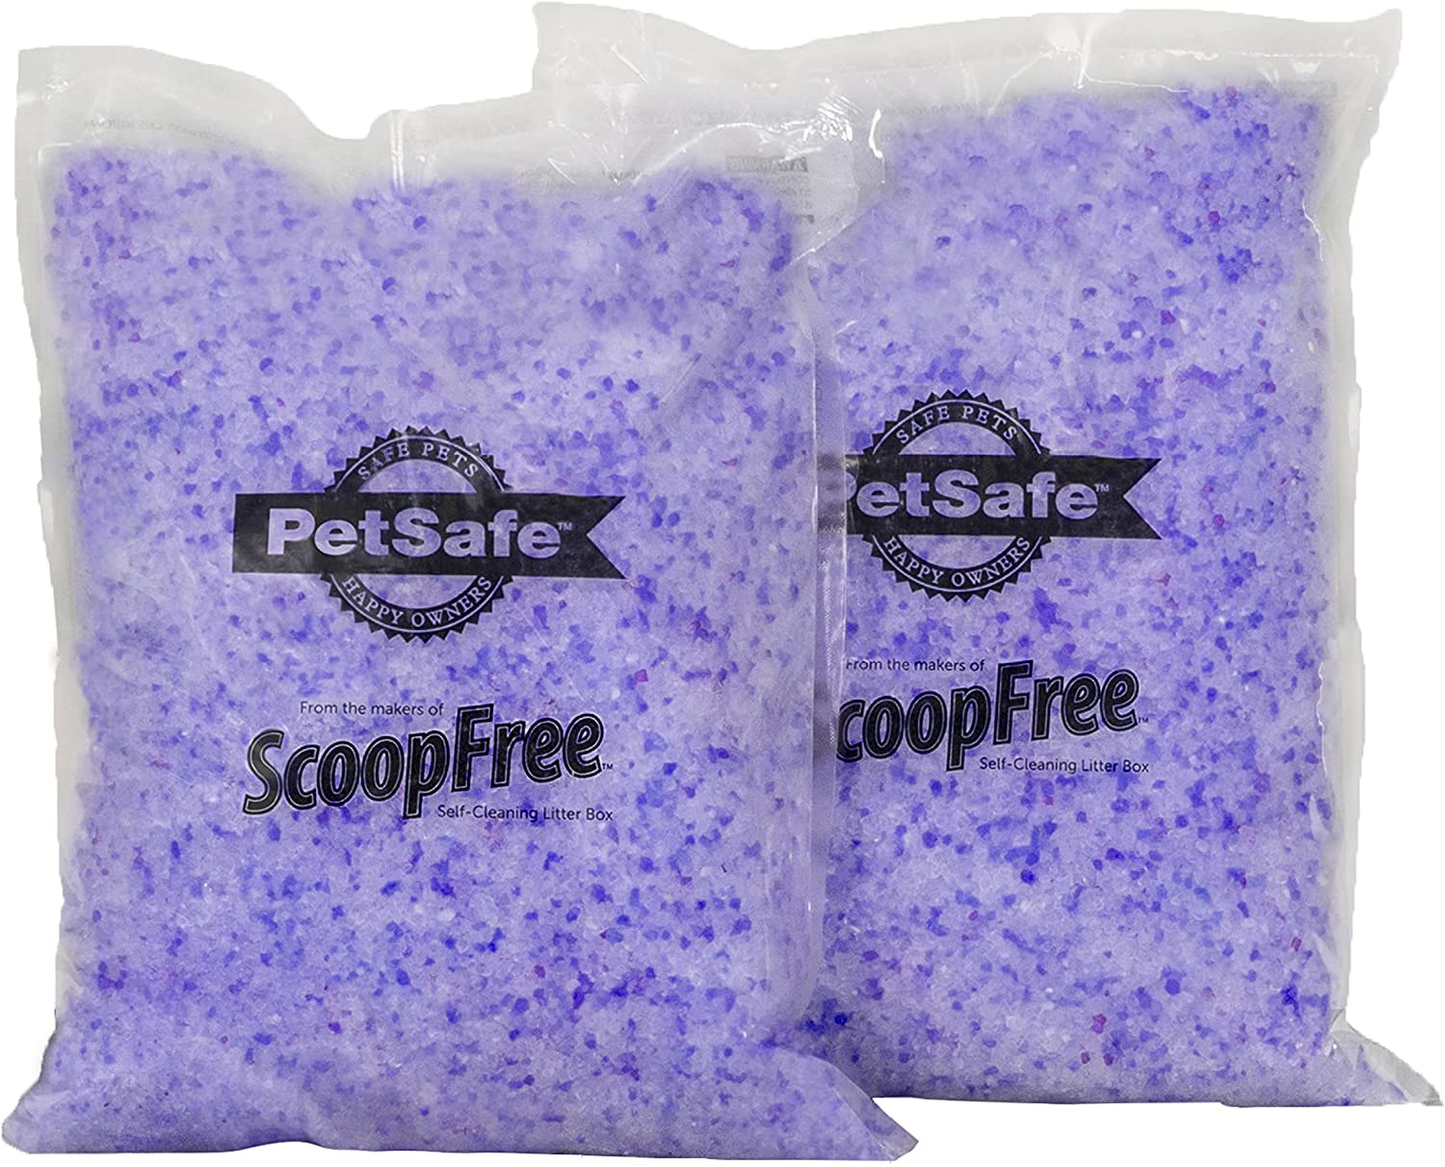 Petsafe Scoopfree Premium Crystal Cat Litter - Includes 2 Bags (4.5 Lb Each) of Litter - Works with Any Traditional Litter Box, Absorbs Faster than Clay Clumping, Low Tracking for Less Mess Animals & Pet Supplies > Pet Supplies > Cat Supplies > Cat Litter Waste Management Lavender  